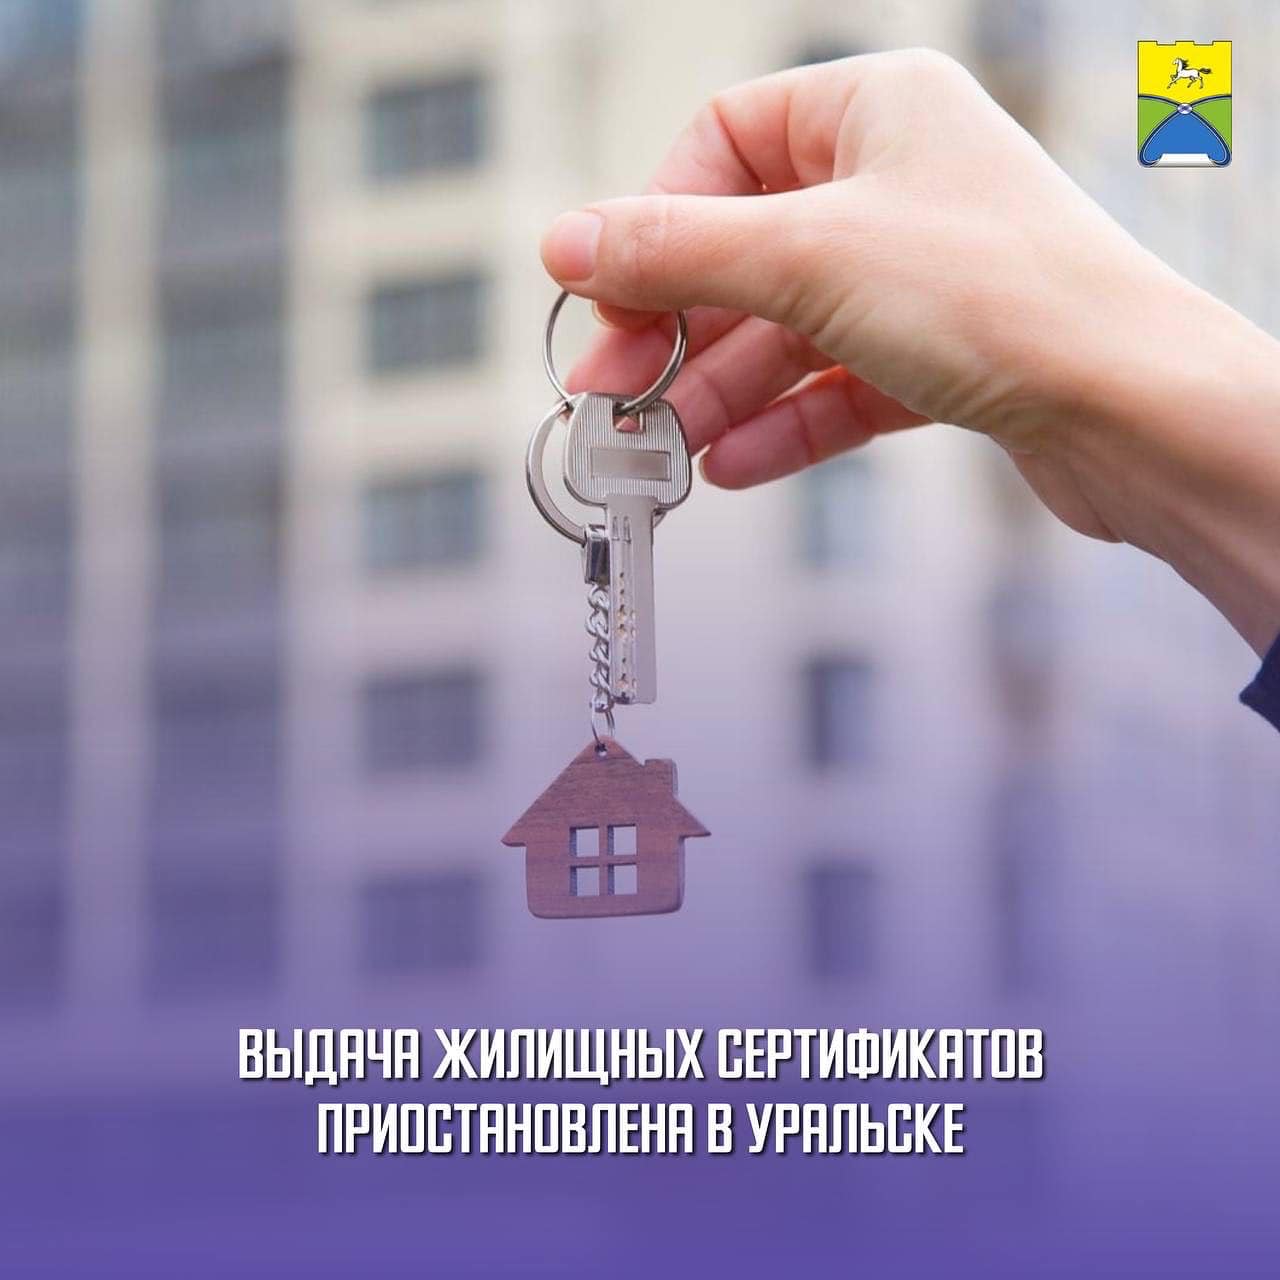 The funds provided for the granting of housing certificates in the city of Uralsk for 2022 have been fully implemented. In this regard, at present the issuance of housing certificates has been suspended